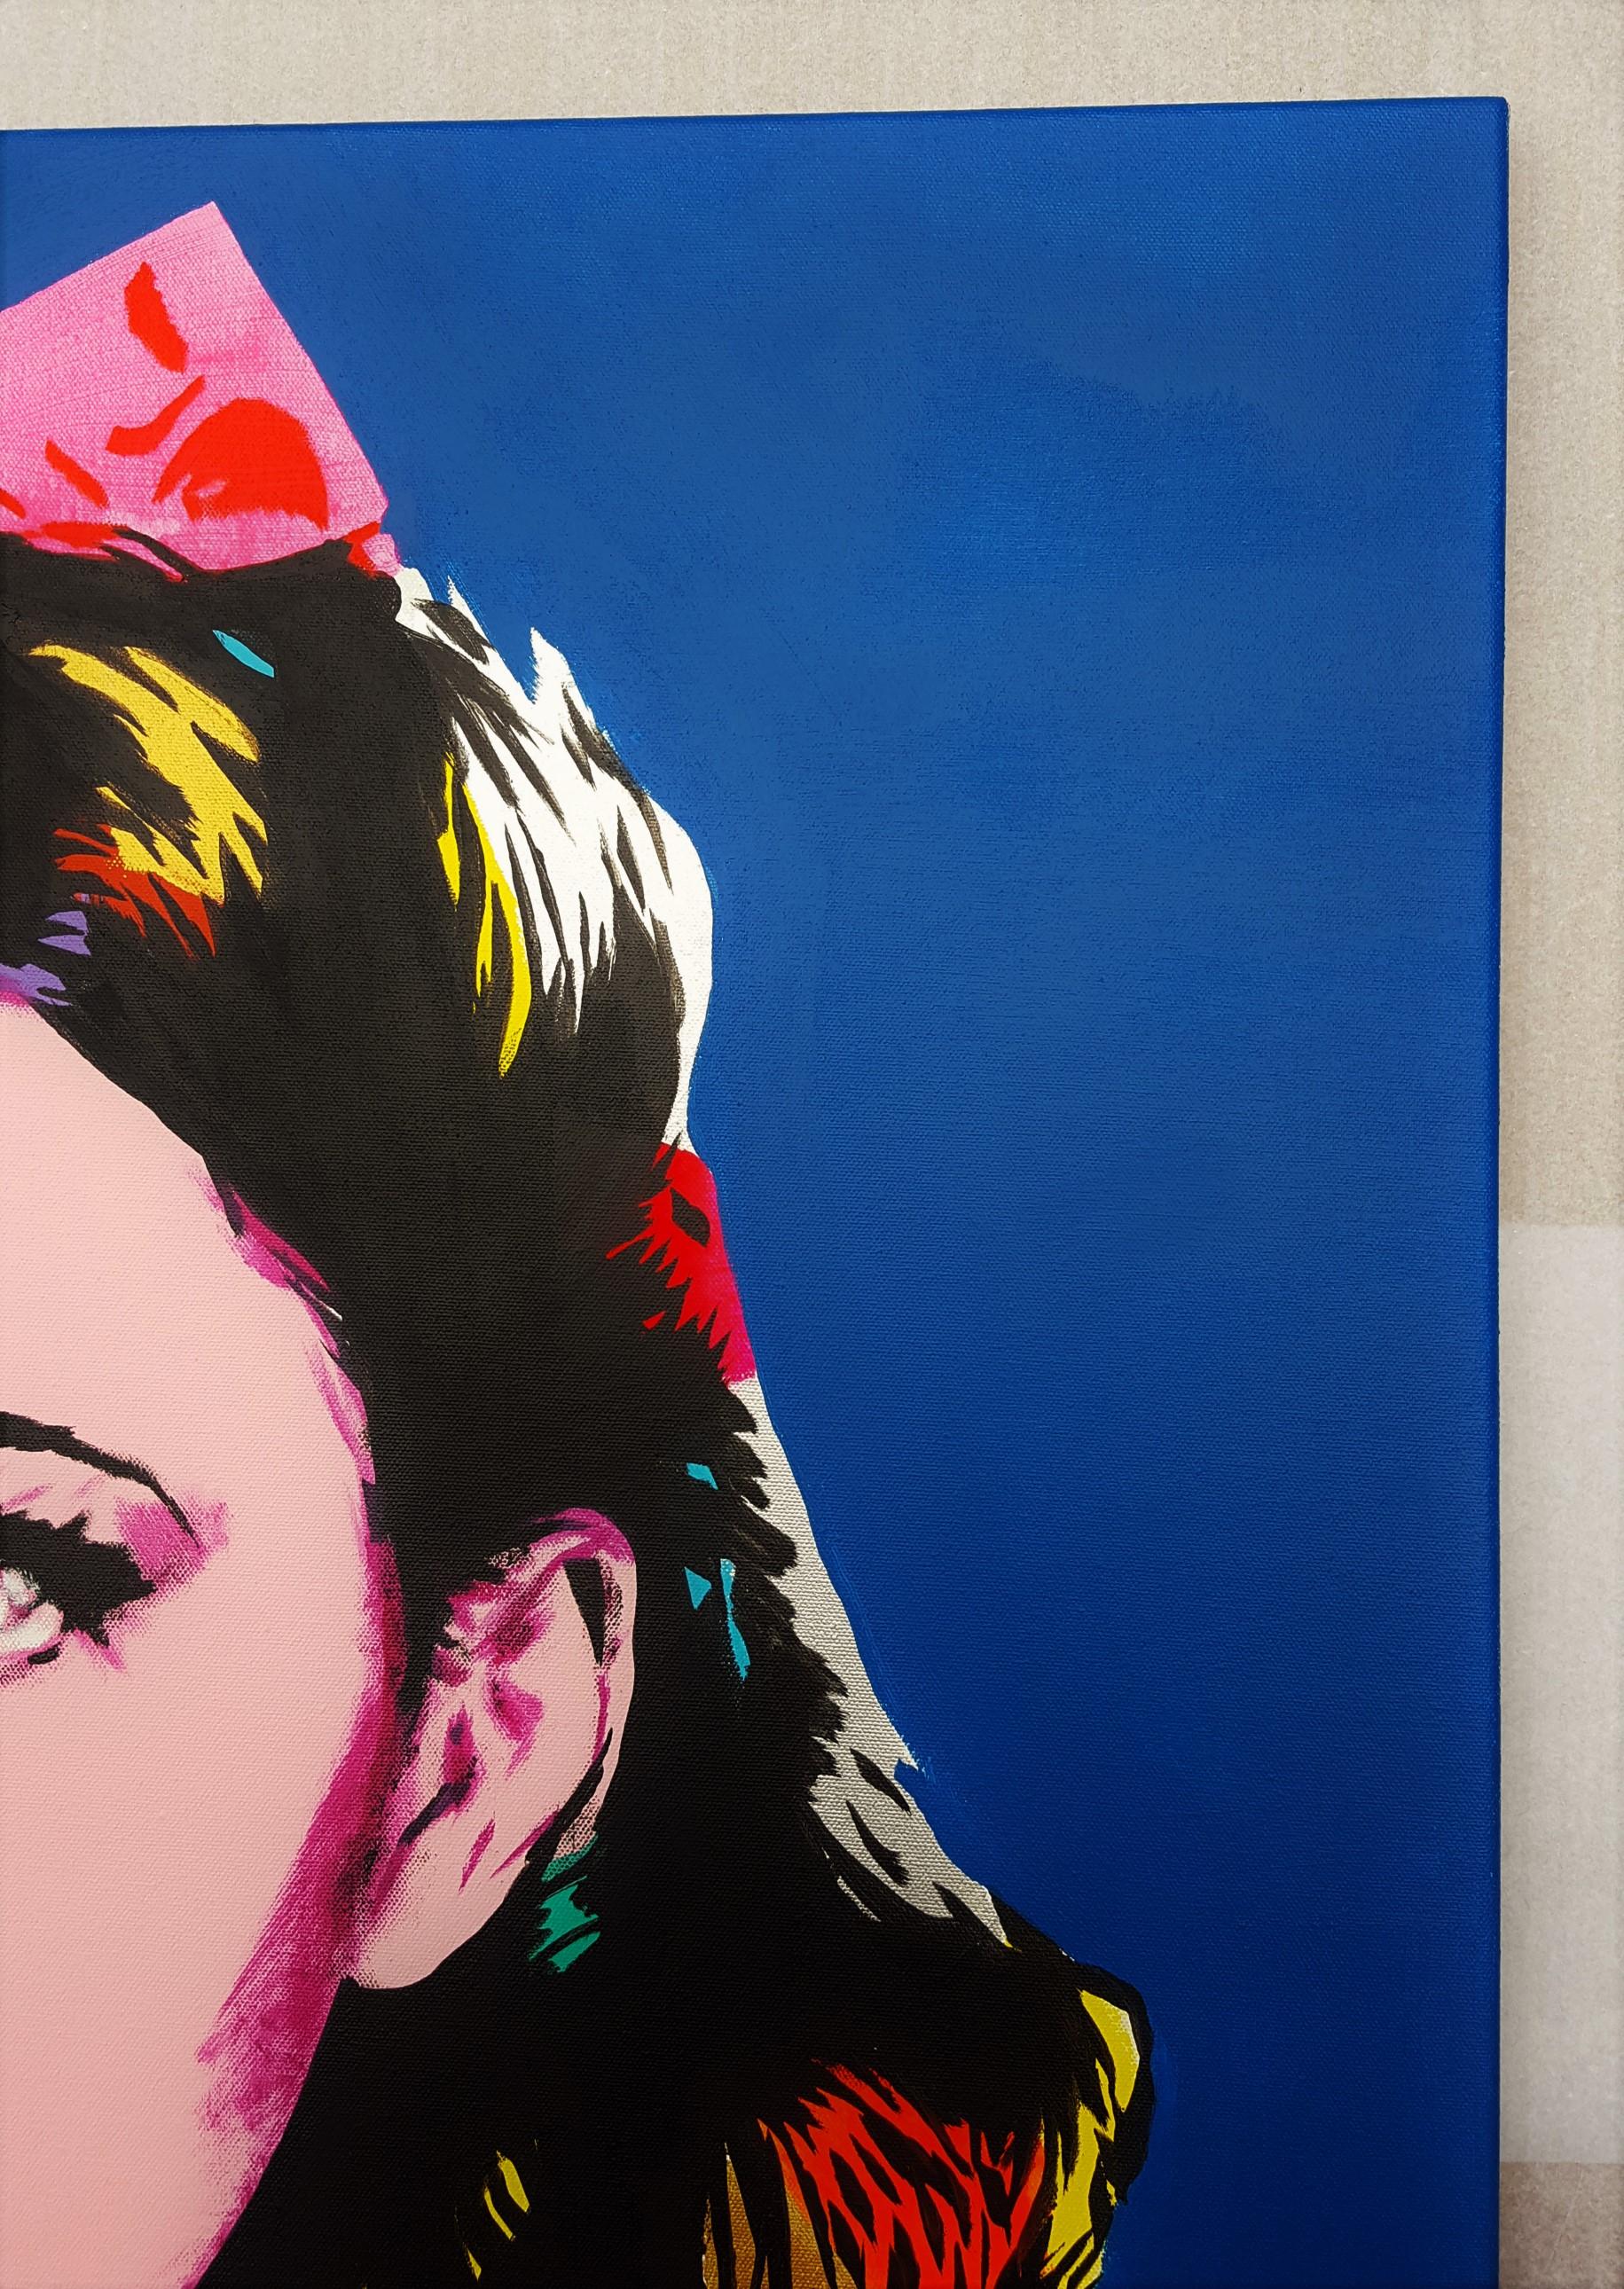 Dorothy Icon VI (Judy Garland) - Contemporary Painting by Jack Graves III